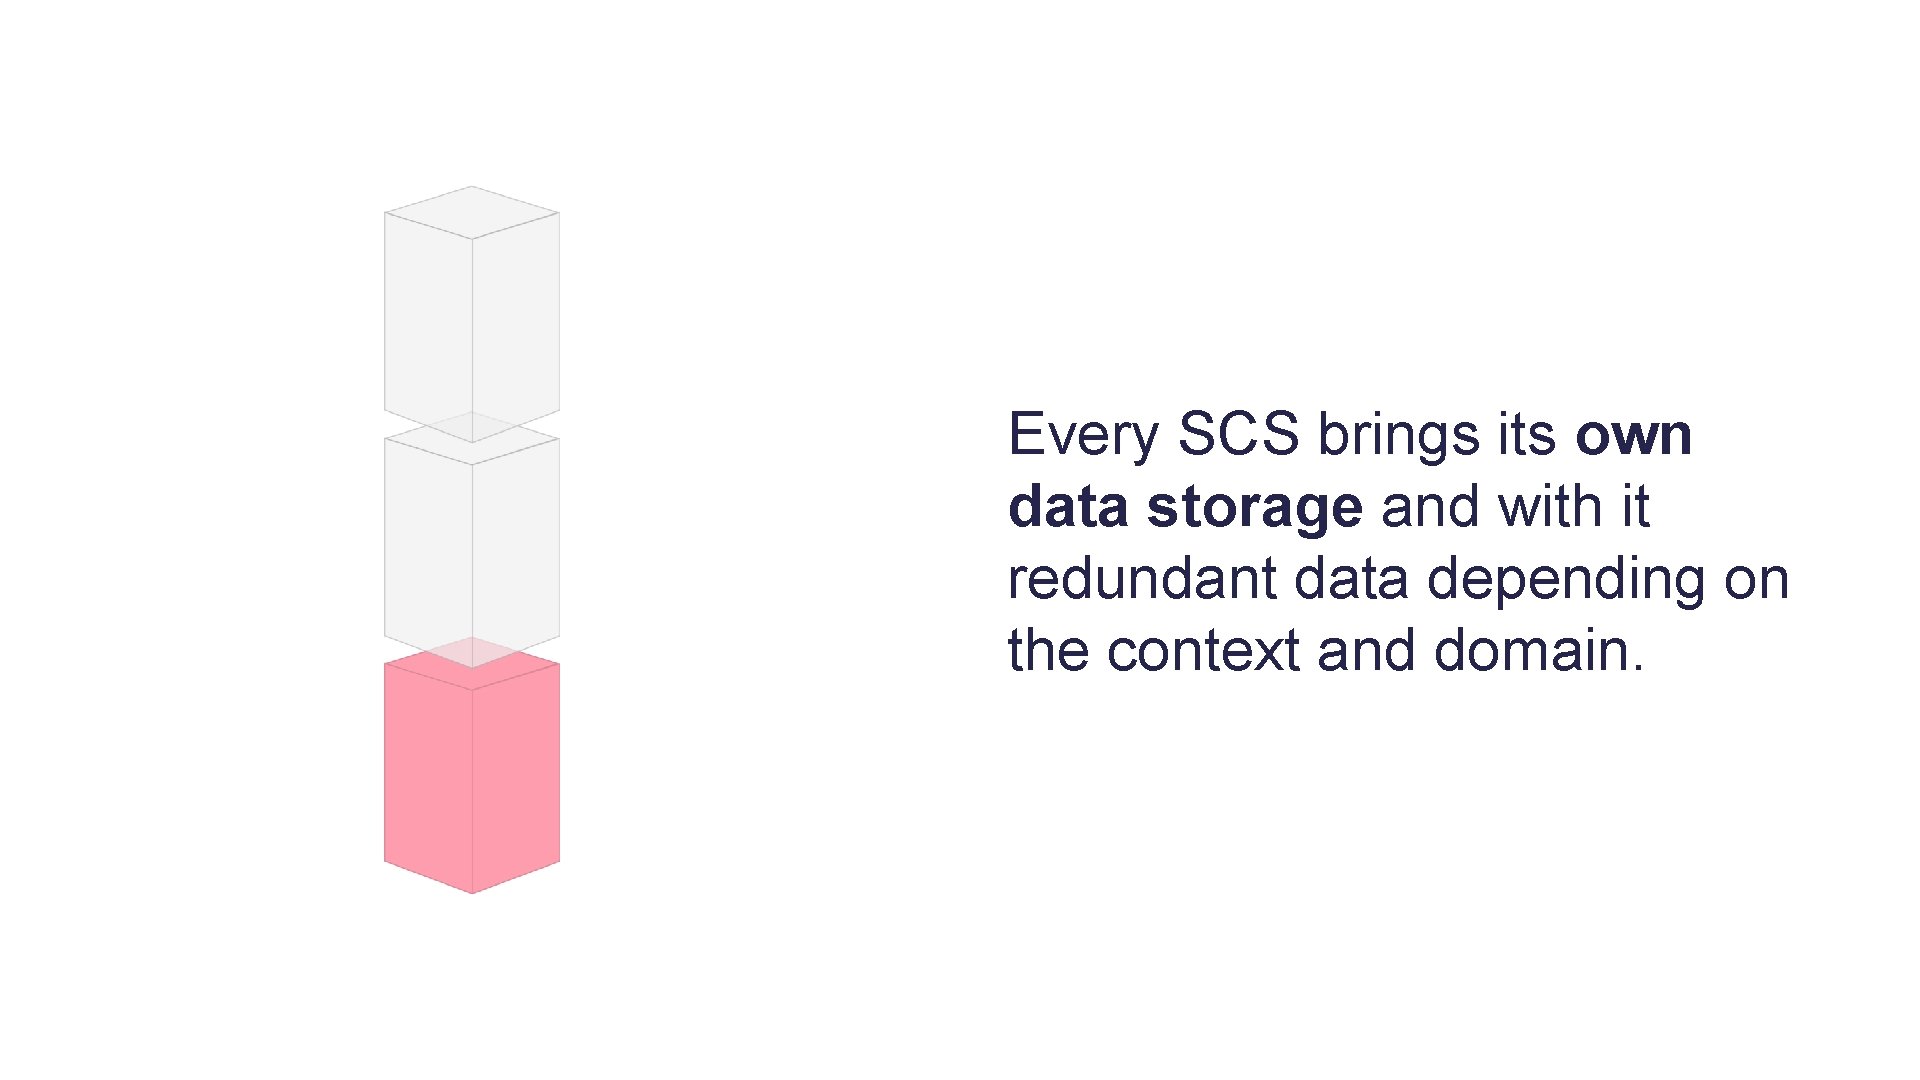 Every SCS brings its own data storage and with it redundant data depending on